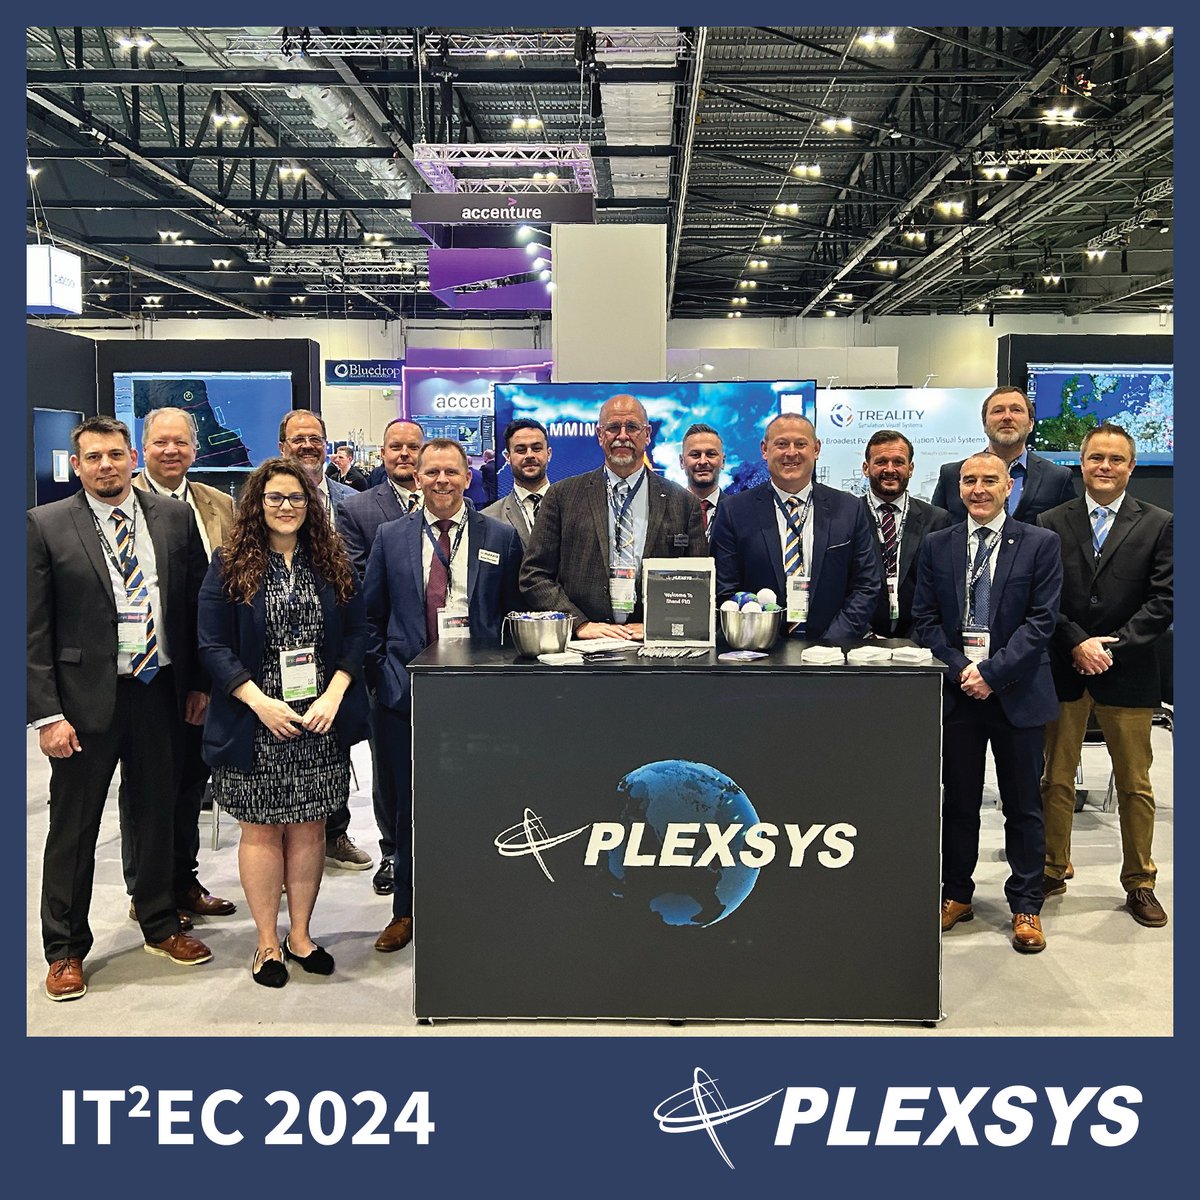 Our Tradeshow Team at IT2EC 2024 is proud to represent over 200 PLEXSYS Interface Products, Inc. employees who create and evolve our Ecosystem of Solutions to best suit customers' training and simulation needs.

#IT2EC #ITEC #modelingandsimulation #defenceindustry